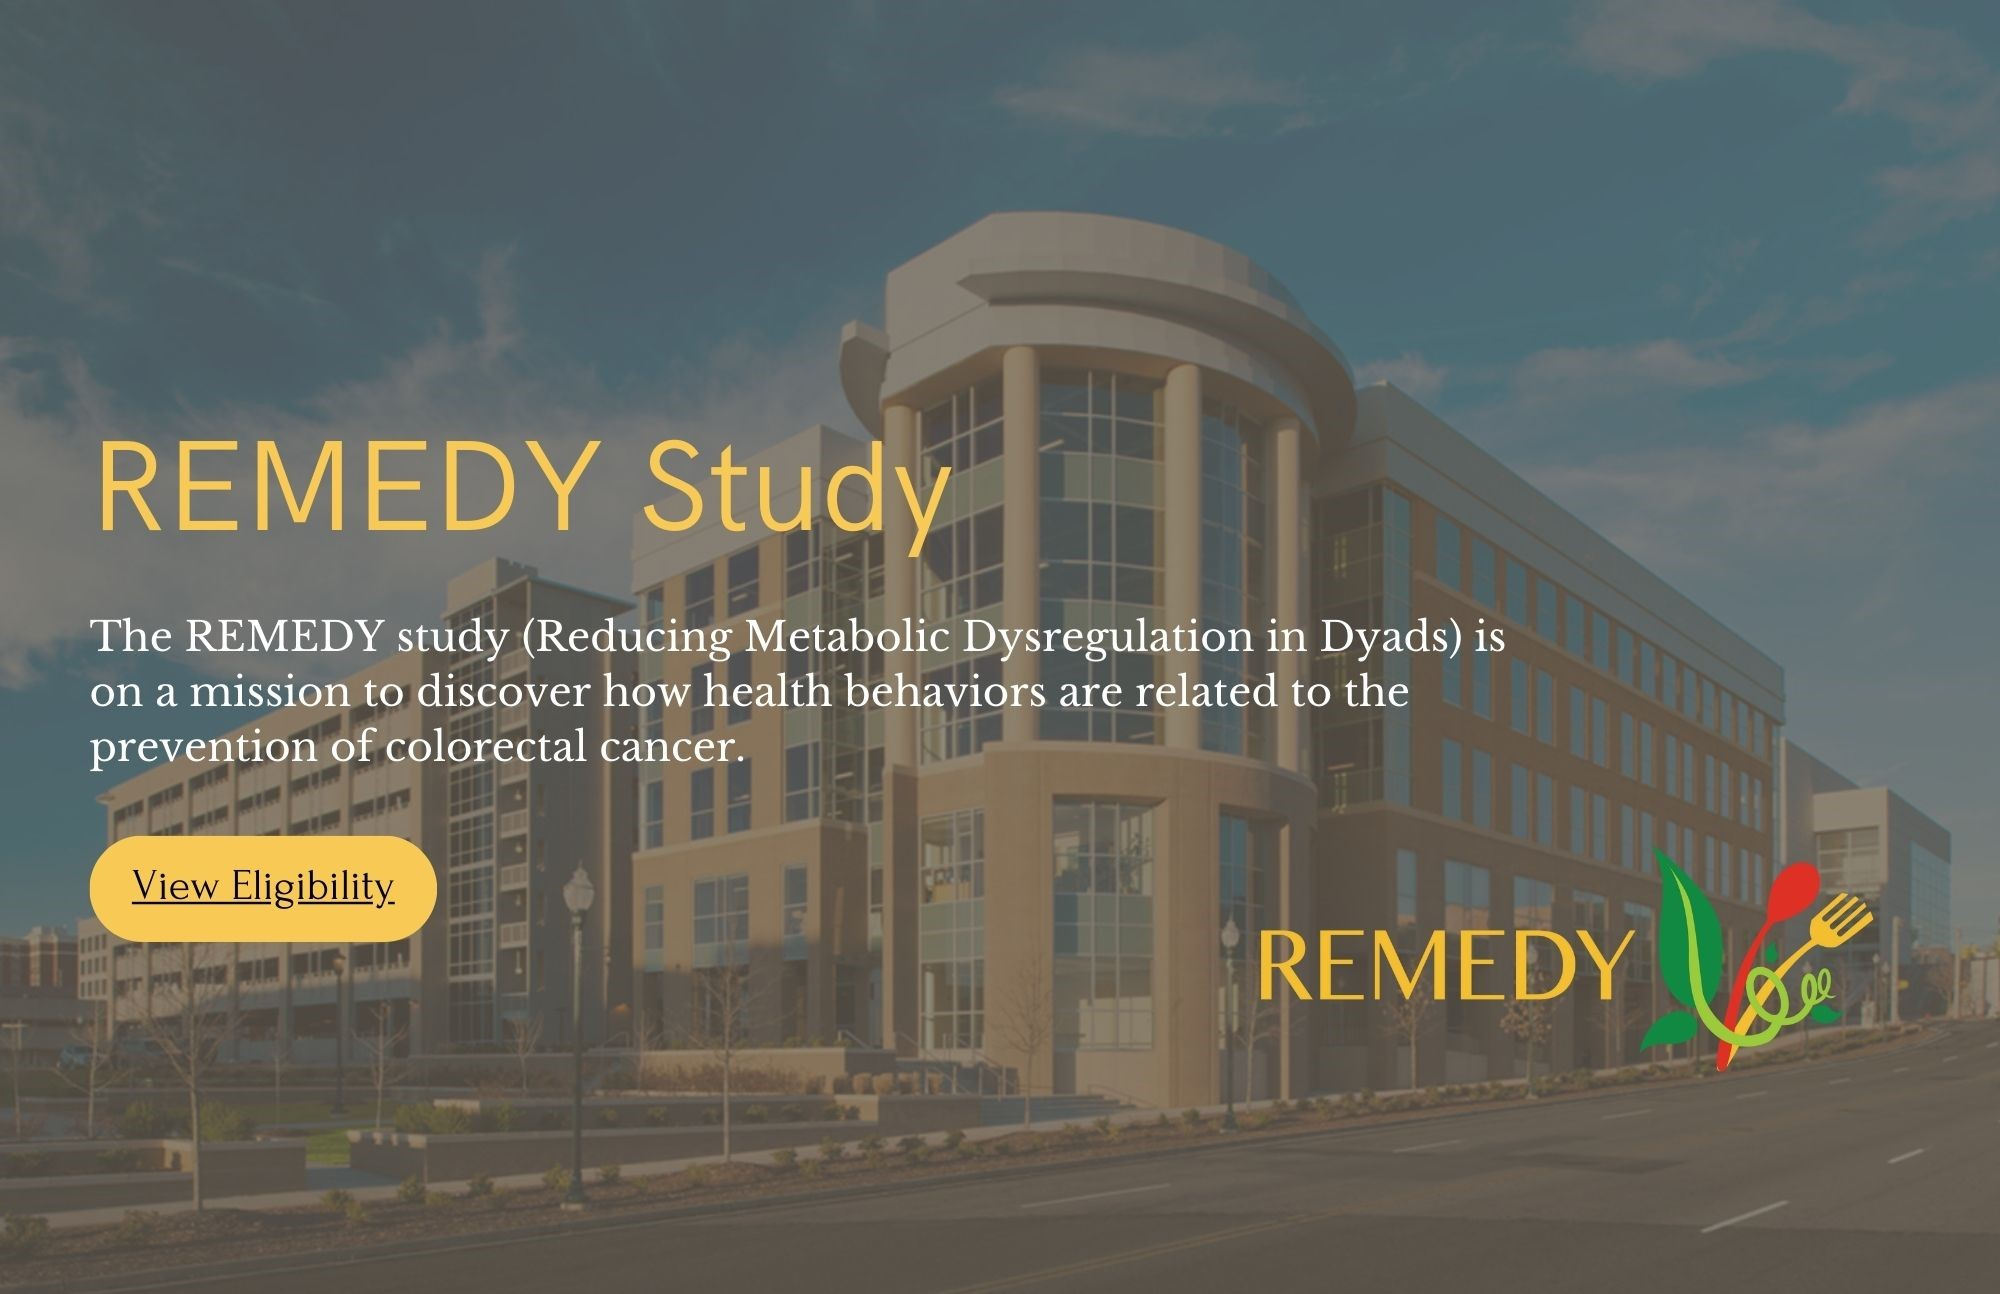 REMEDY Study and Eligibility